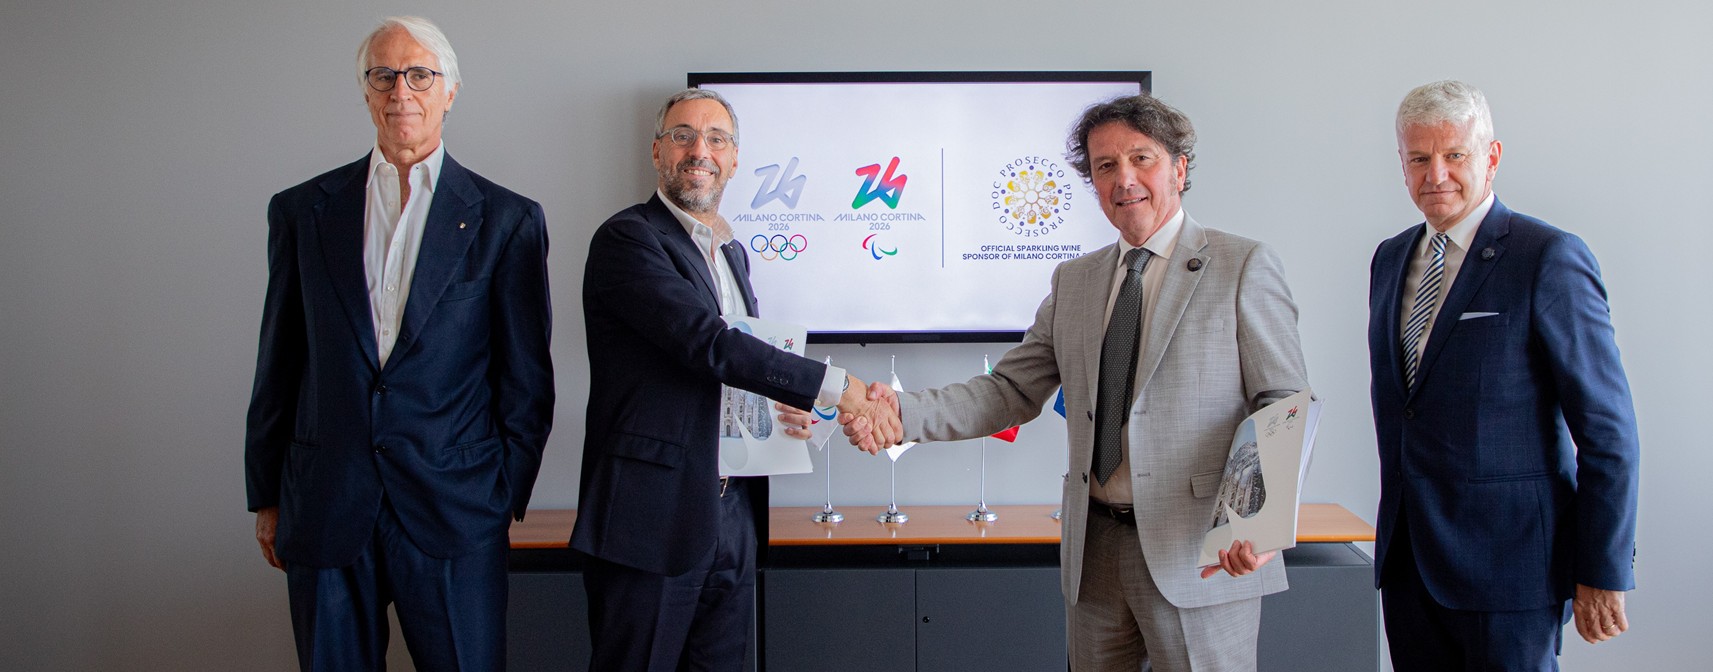 Prosecco named as official sparkling wine sponsor of Milan Cortina 2026